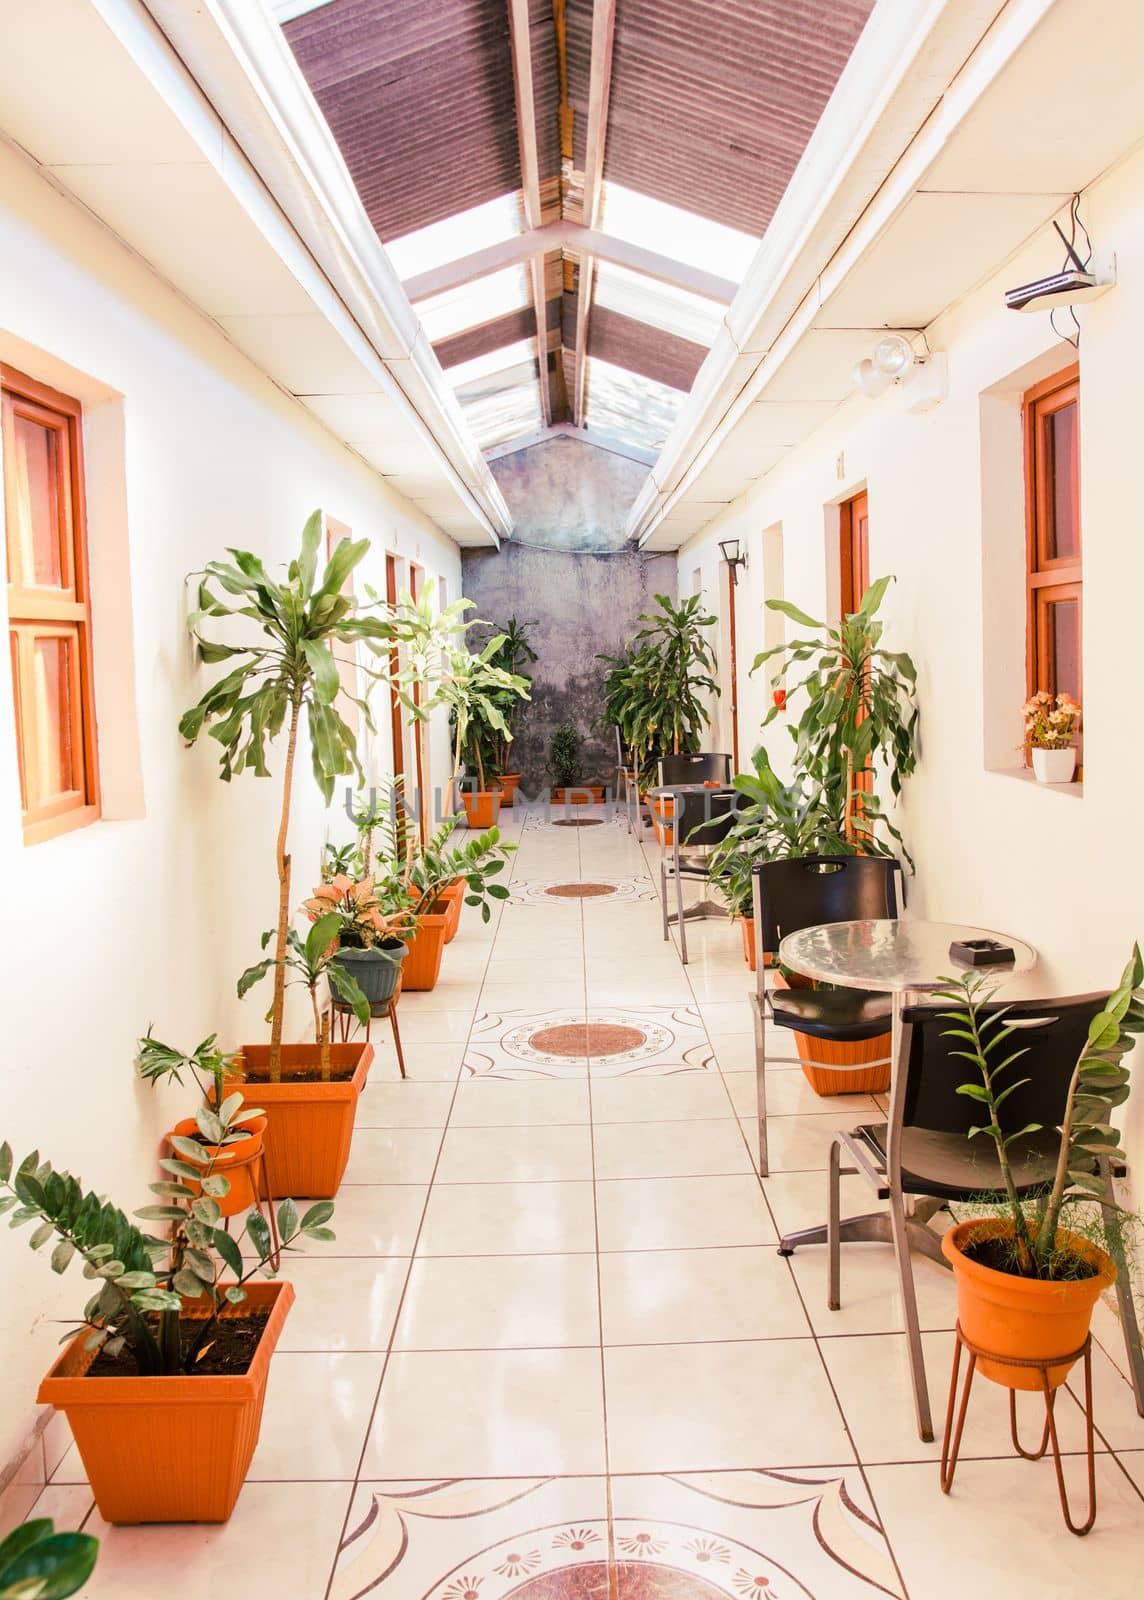 A hotel corridor with pots of natural plants. Corridors of a tropical hotel by isaiphoto